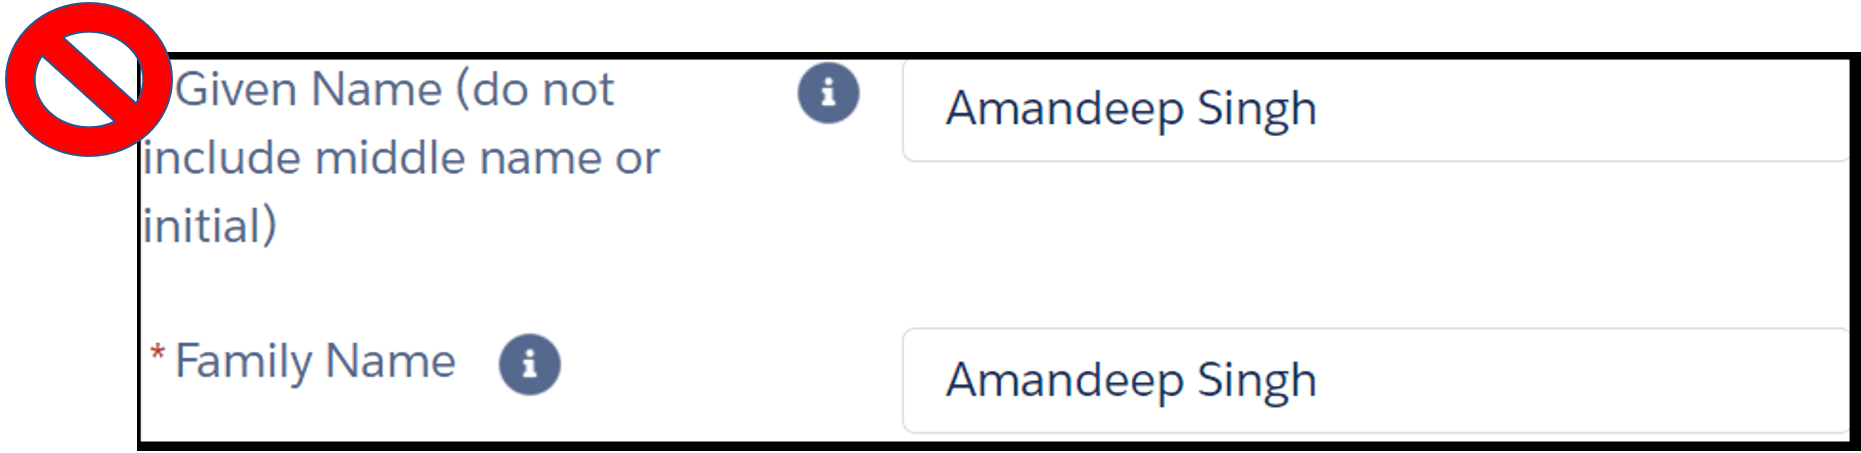 Image shows two fields in an online form. The instruction next to the first field reads, “* given name (do not include middle name or initial)”. The text entry field to its right shows example “Amandeep Singh”. Instruction for second field reads, “* family name”. The text entry field to its right shows example “Amandeep Singh”. There is a red “no allowed” symbol next image indicating that fields have been filled out incorrectly.